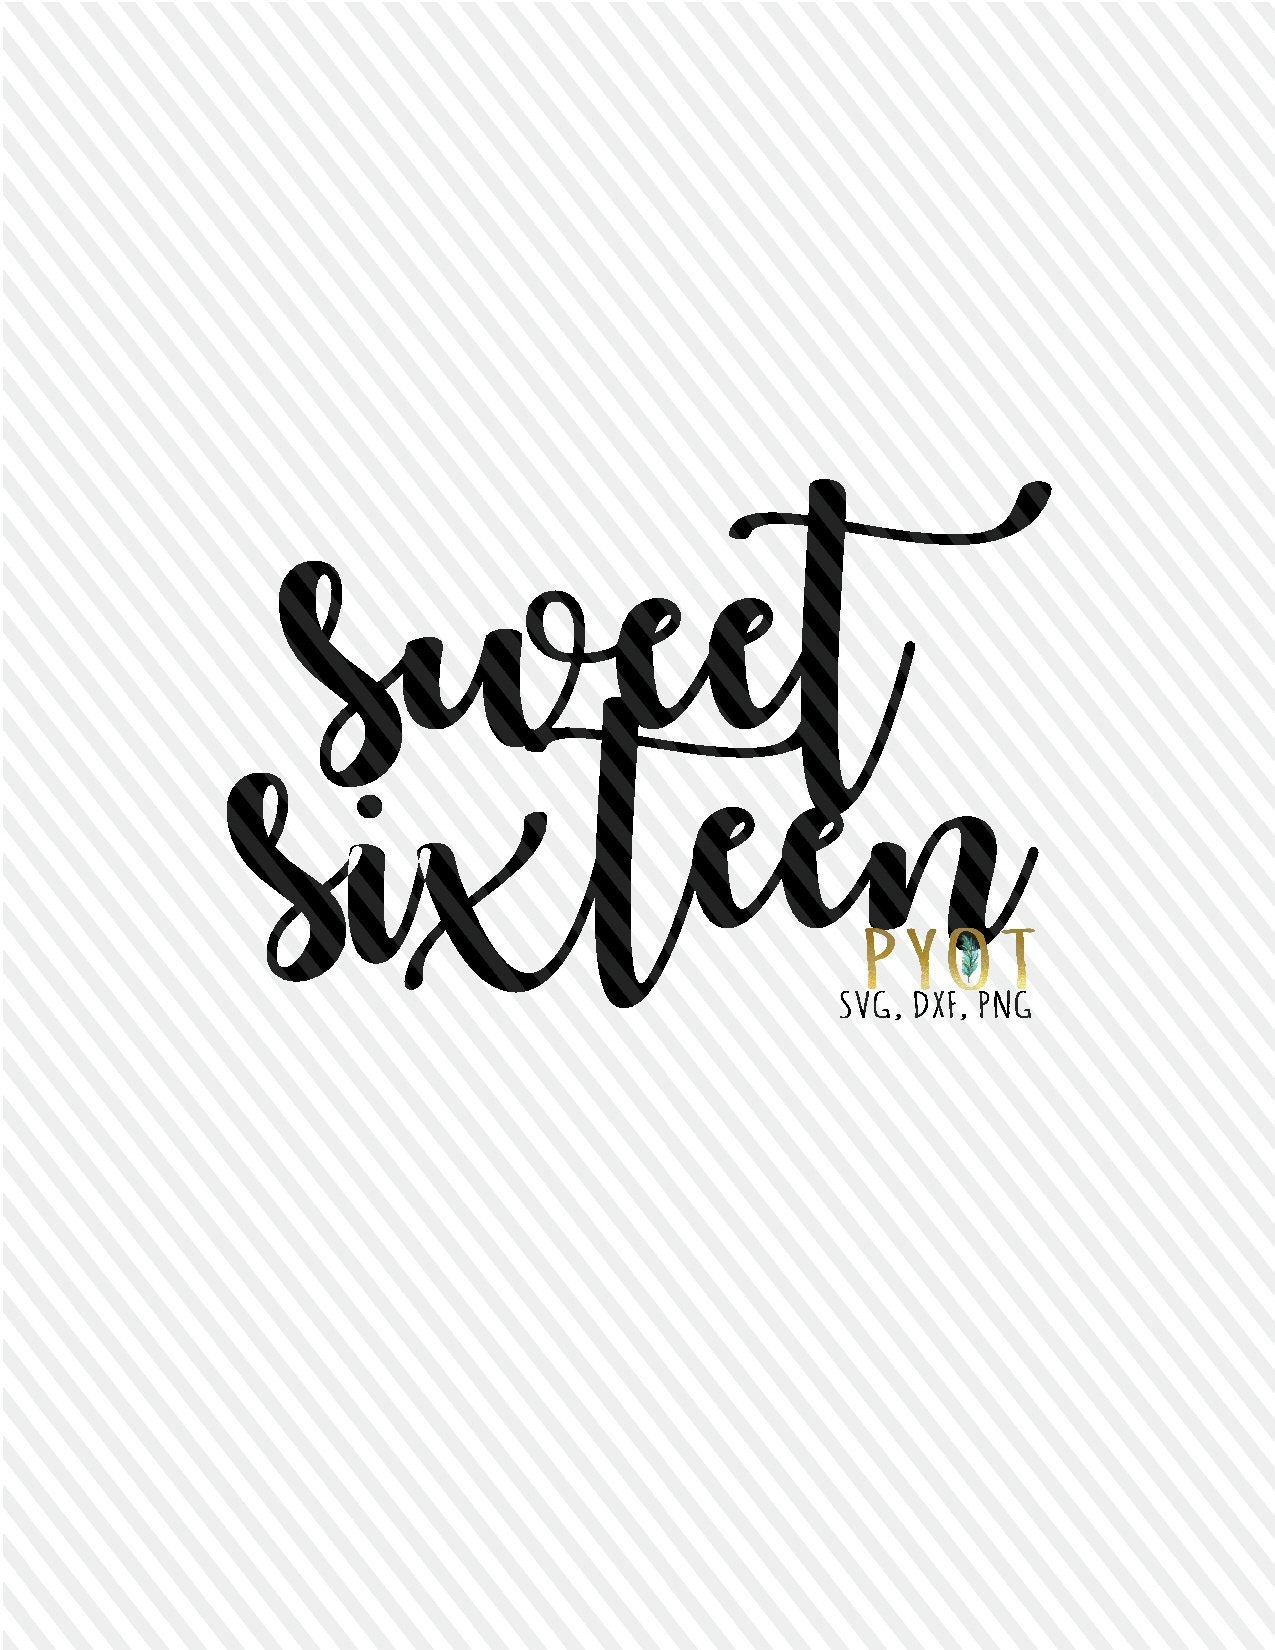 Download Sweet Sixteen SVG DXF PNG | Etsy